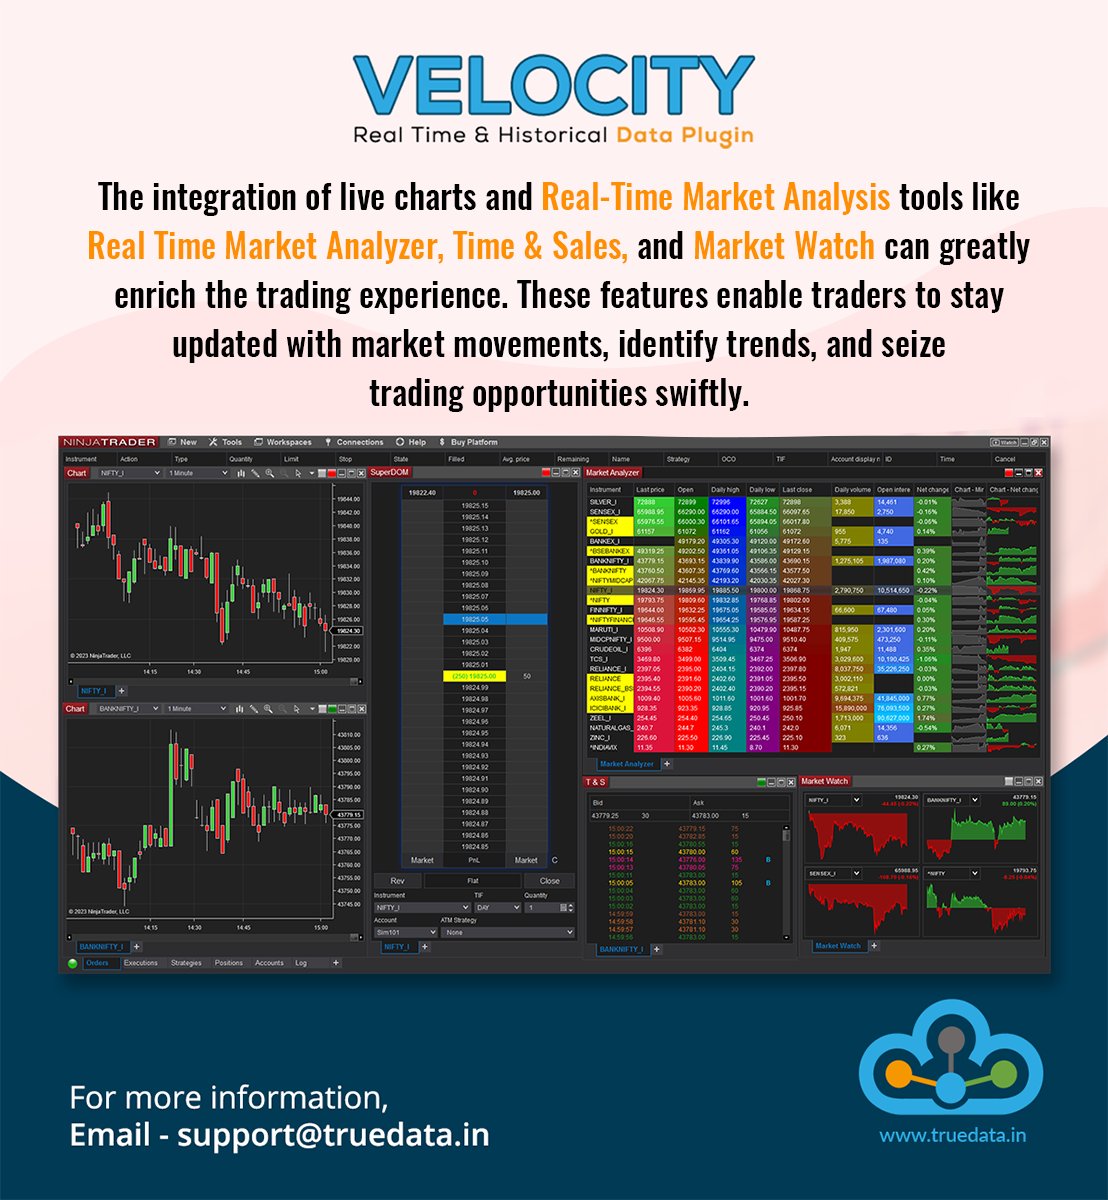 #TrueData Velocity Real-Time & Historical Data Plugin
The integration of live charts and real-time market analysis tools like Real Time Market Analyzer.
For more information Visit: bit.ly/3ydCzcO
#truedata #Velocity #RealTimeData #MarketDataPlugin #FreeTrial #EQ #MCX